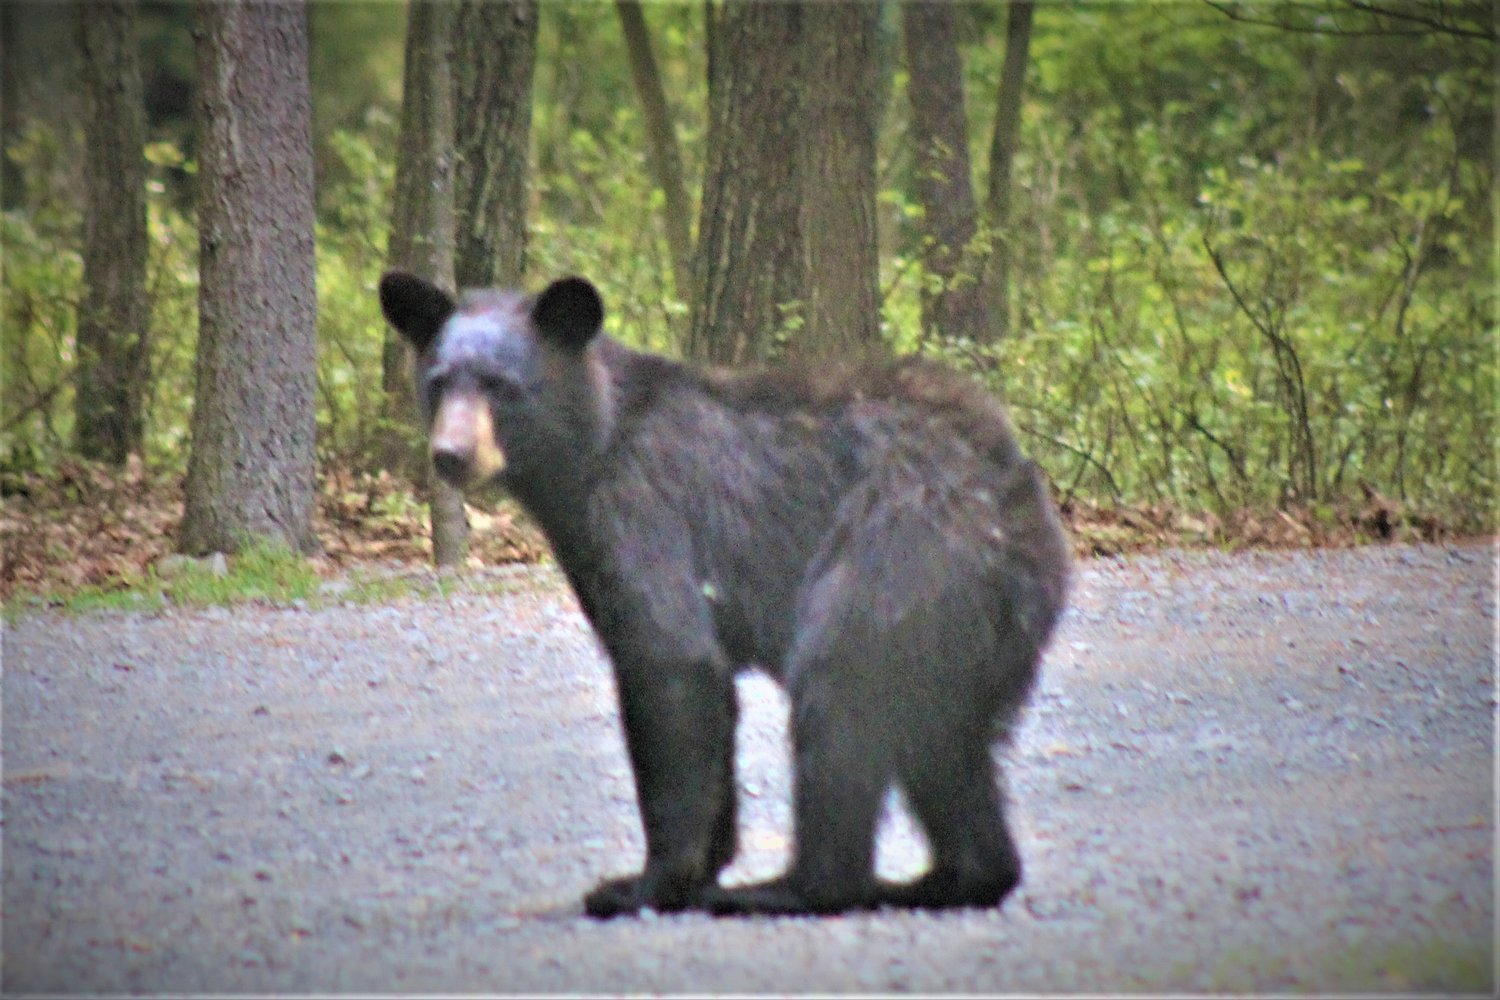 Black bears like this youngster are attracted by trash and can then quickly become a nuisance or worse. Problems can be avoided with simple actions taken by humans.